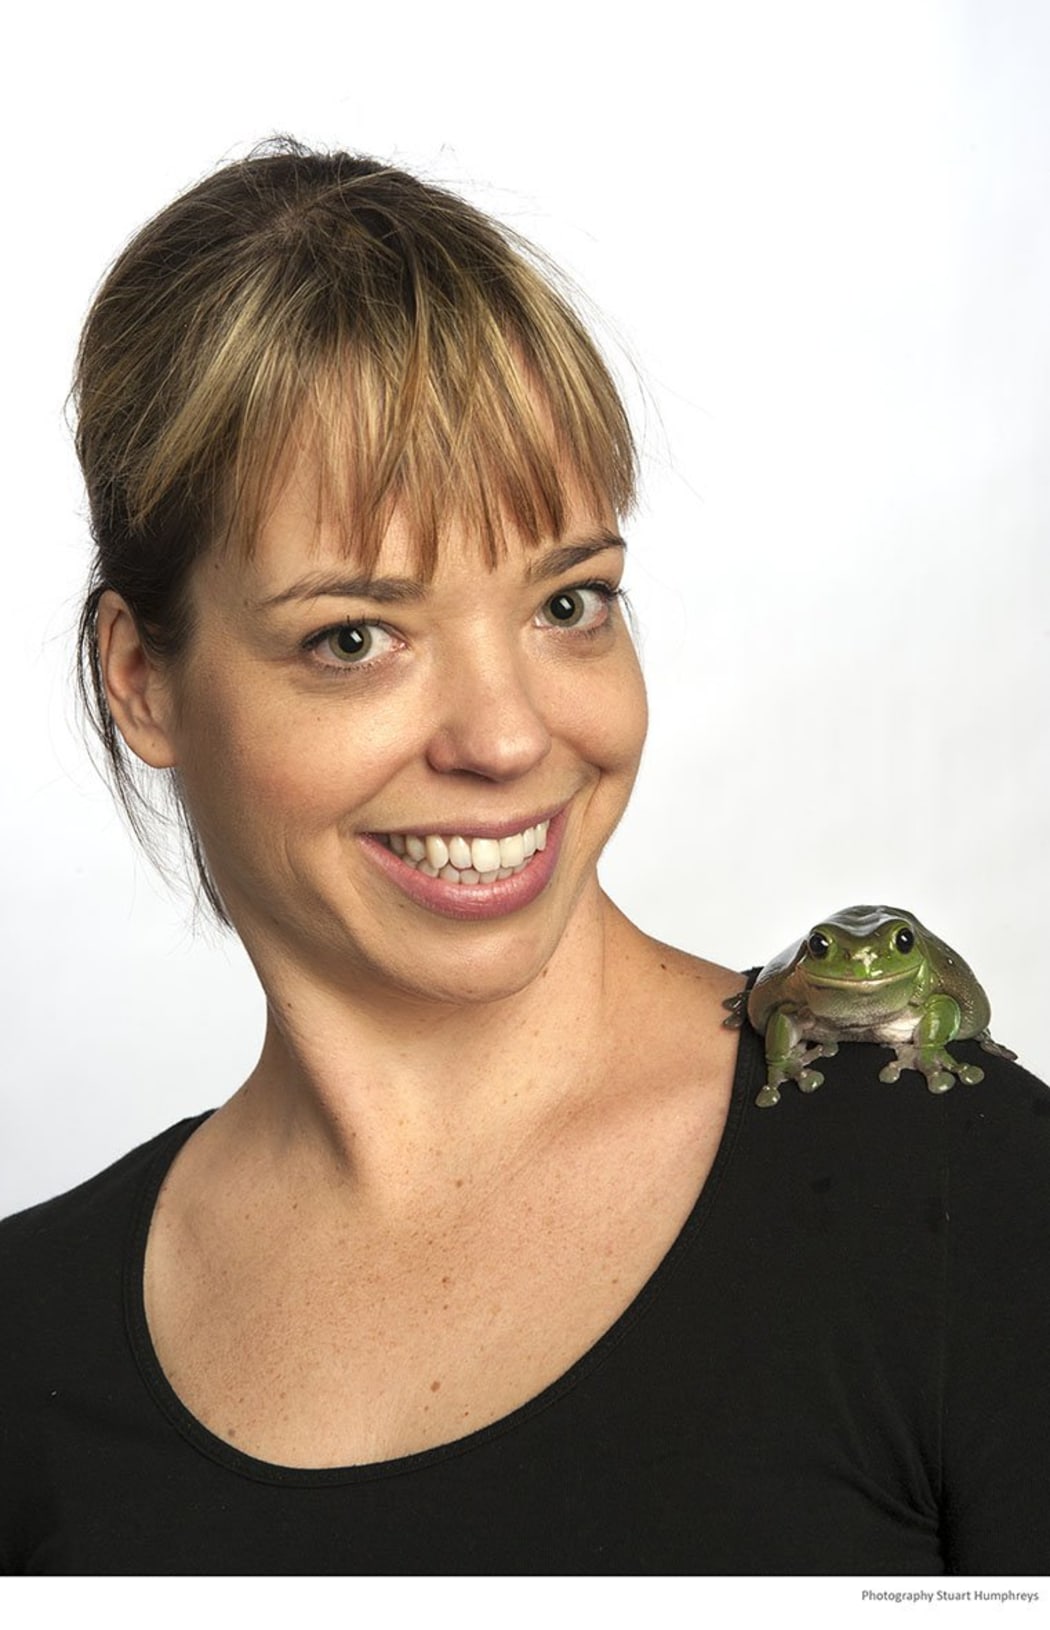 Dr Jodi Rowley is Curator of Amphibian & Reptile Conservation Biology  at the Australian Museum in Sydney.